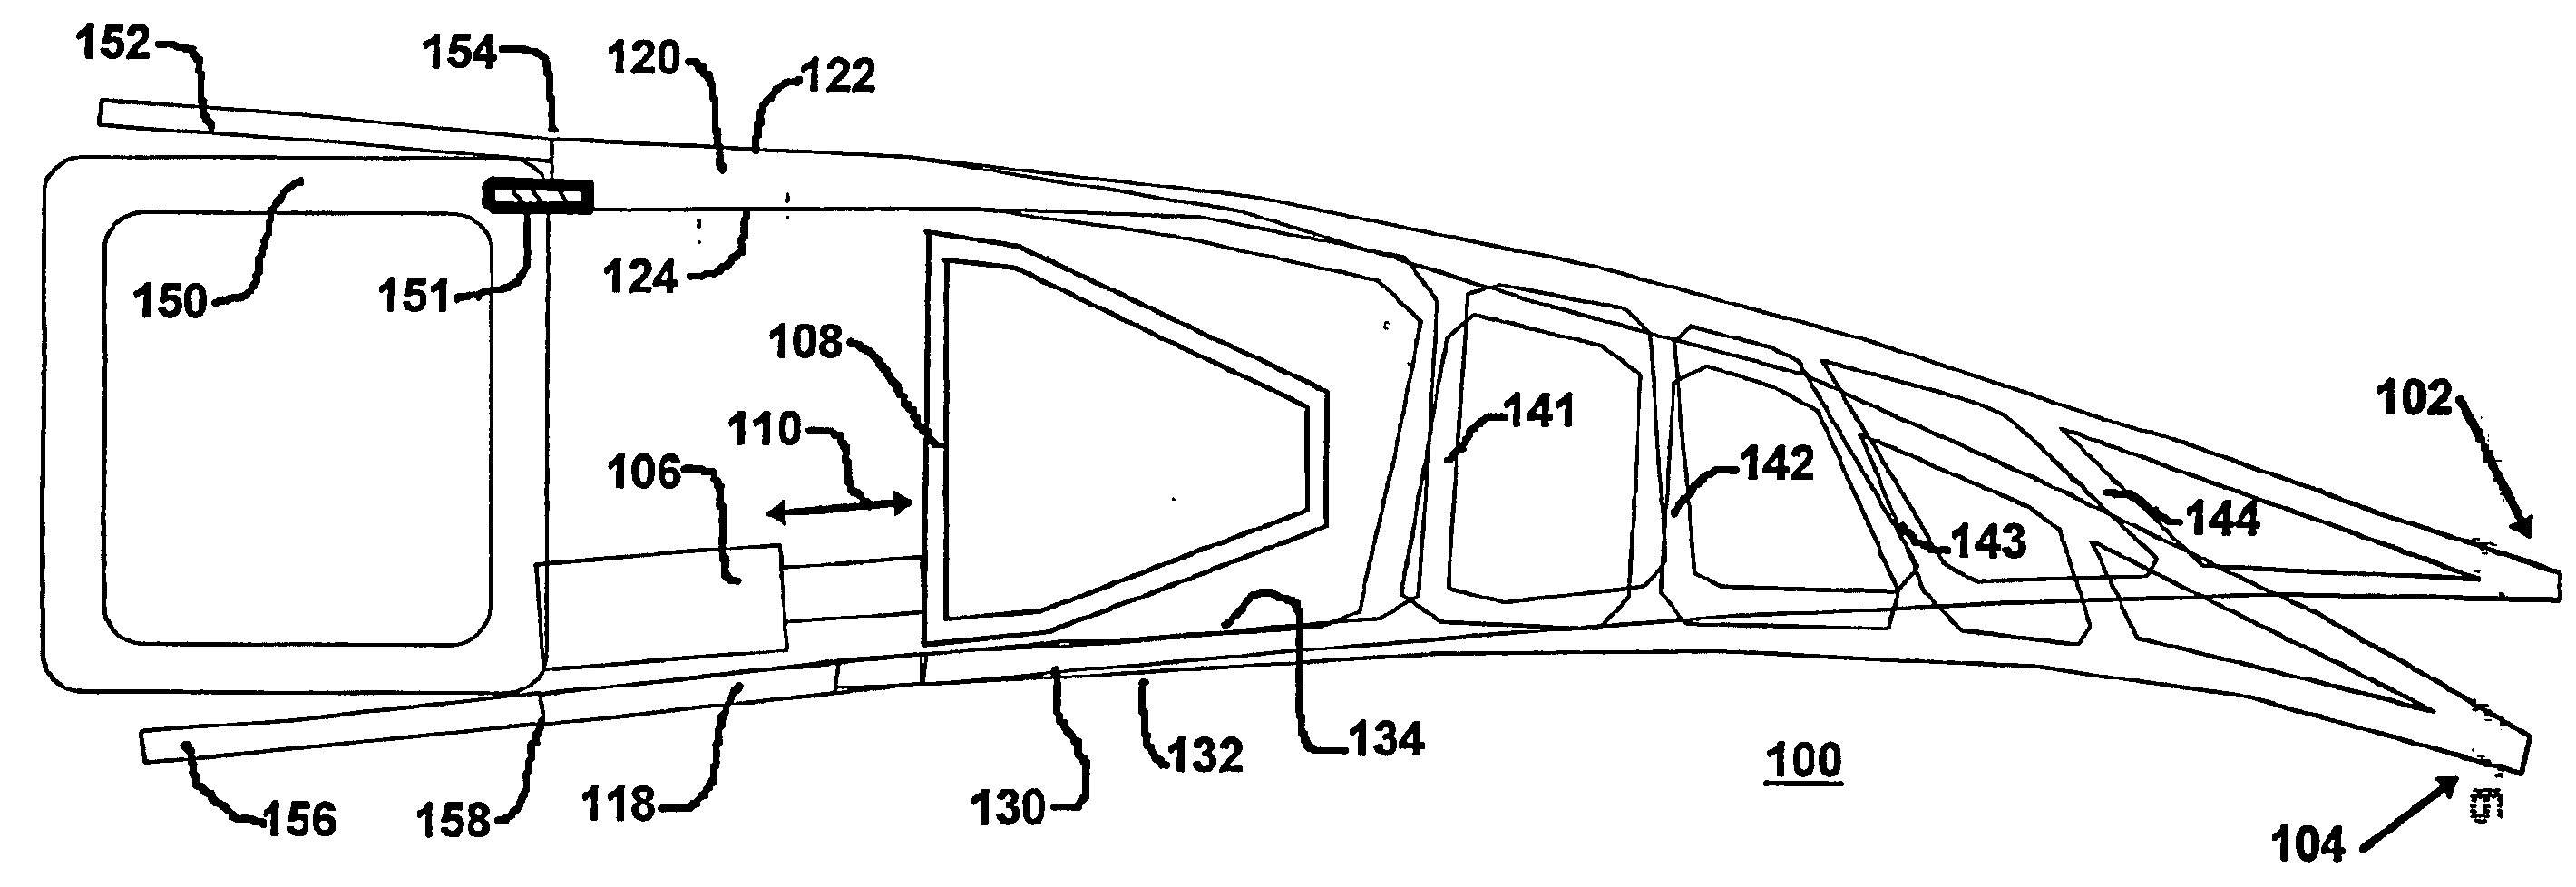 Adaptive compliant wing and rotor system